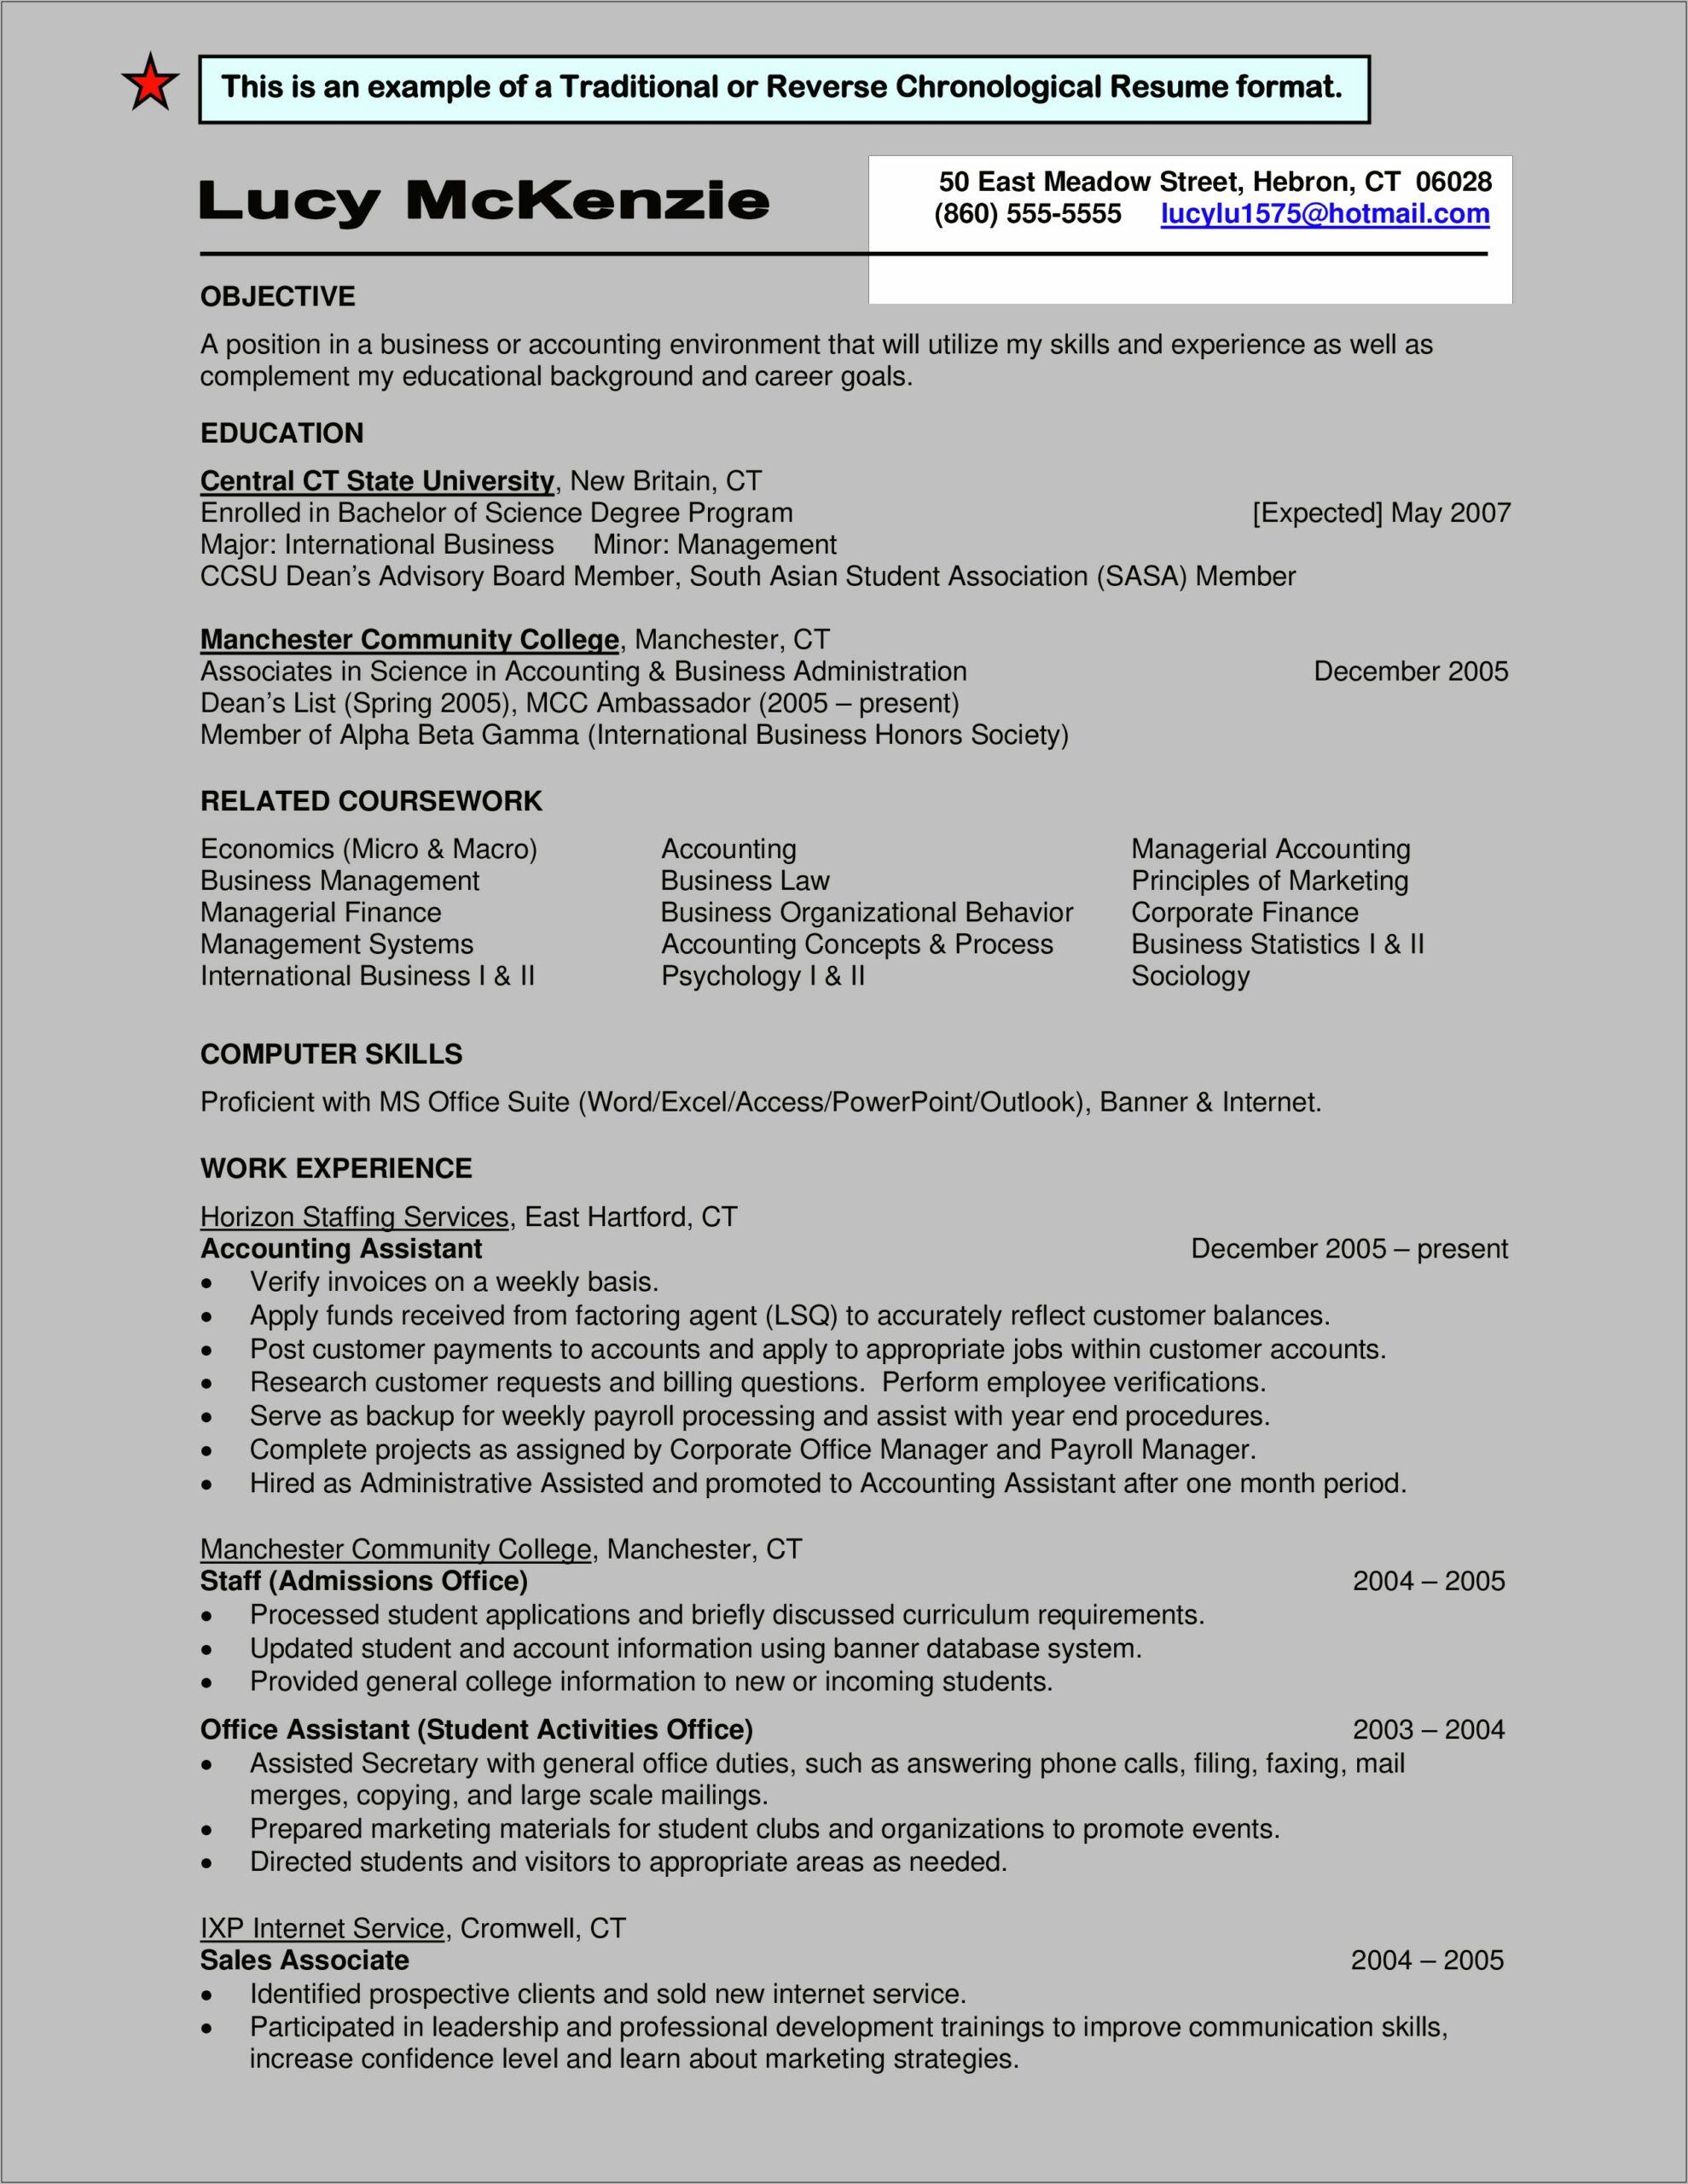 Reverse Chronological Format Resume Example